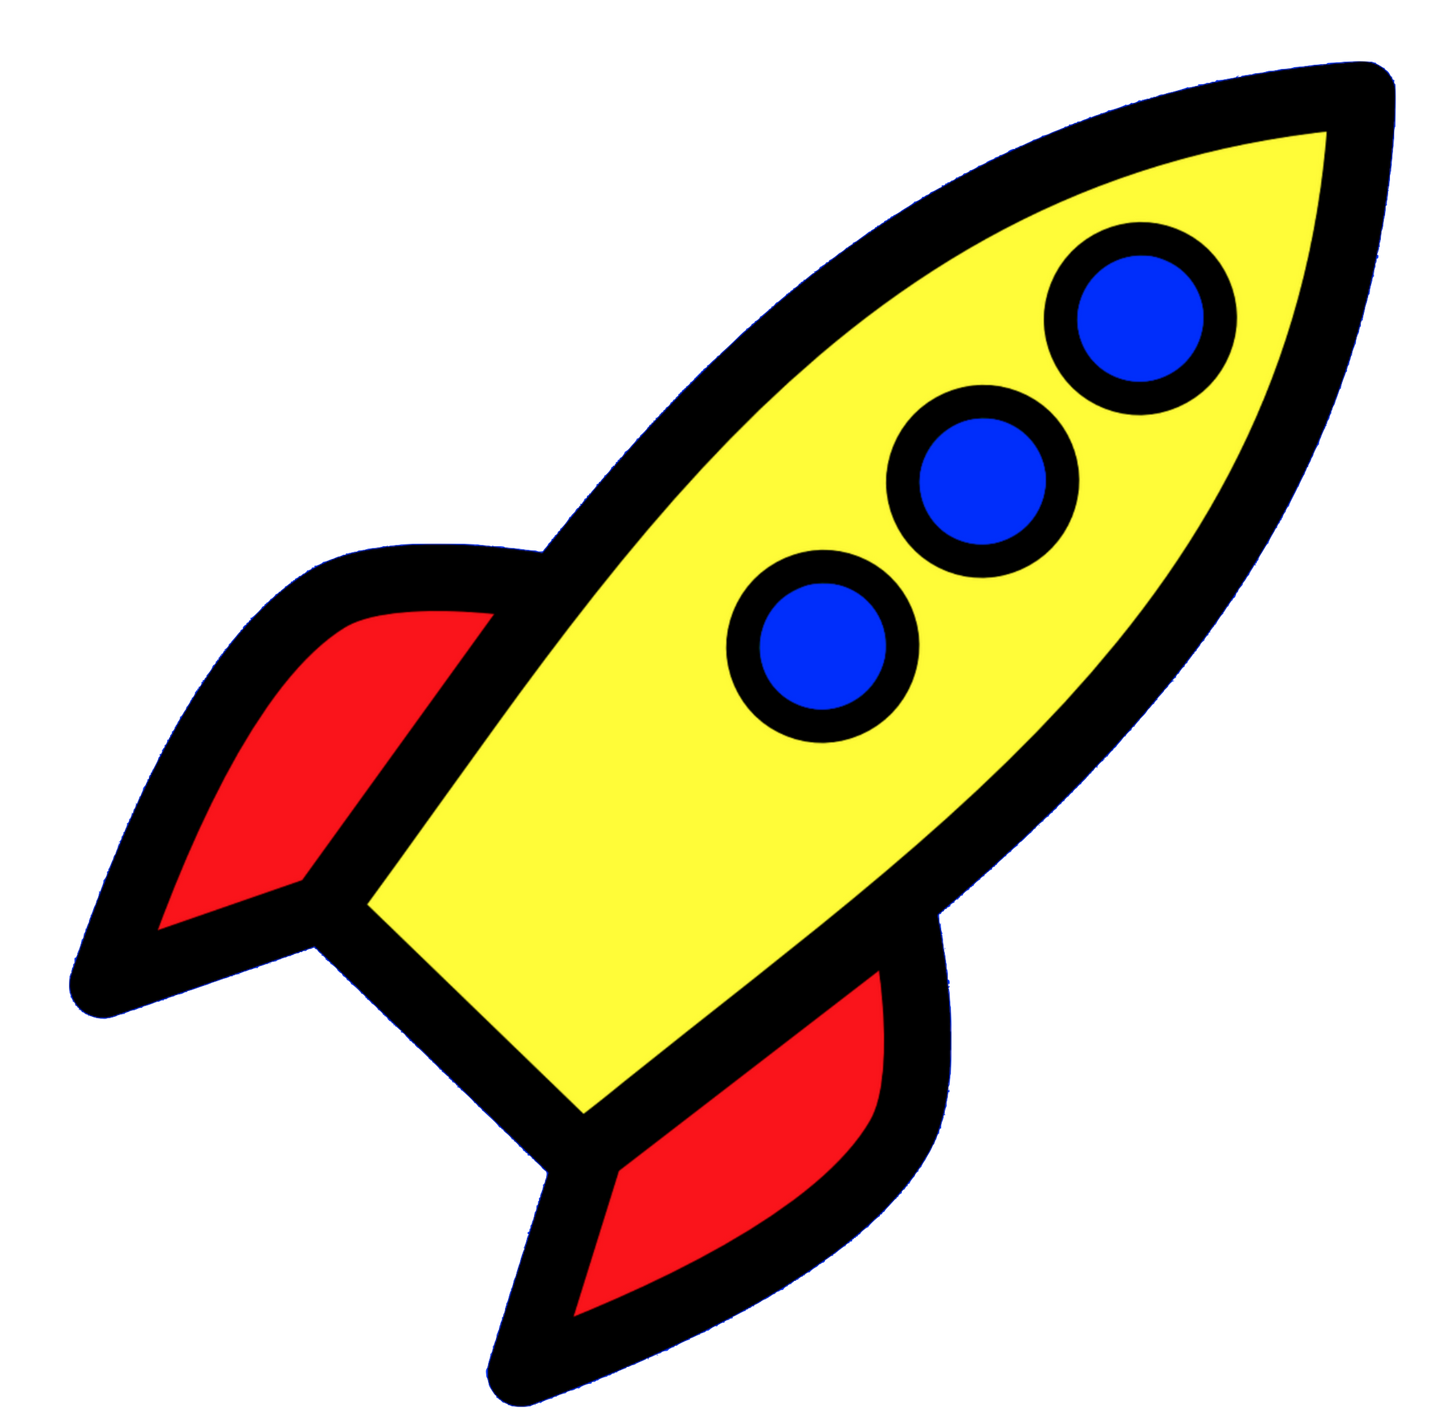 Rockets - 4 Yellow & Red Rockets different colors